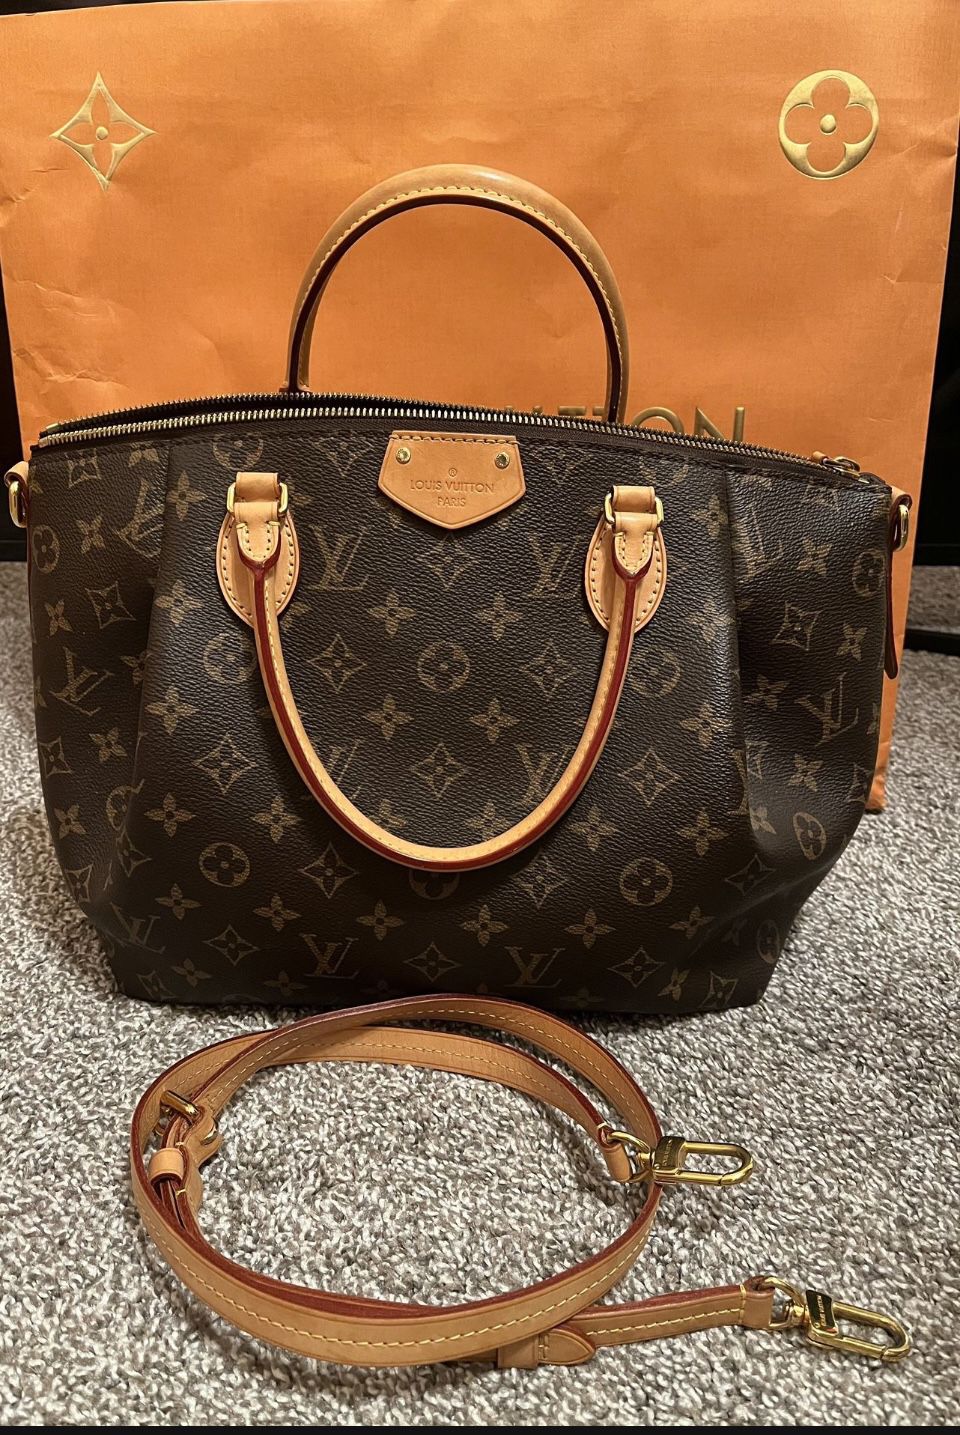 Louis Vuitton turenne pm firm price for Sale in Elk Grove, CA - OfferUp